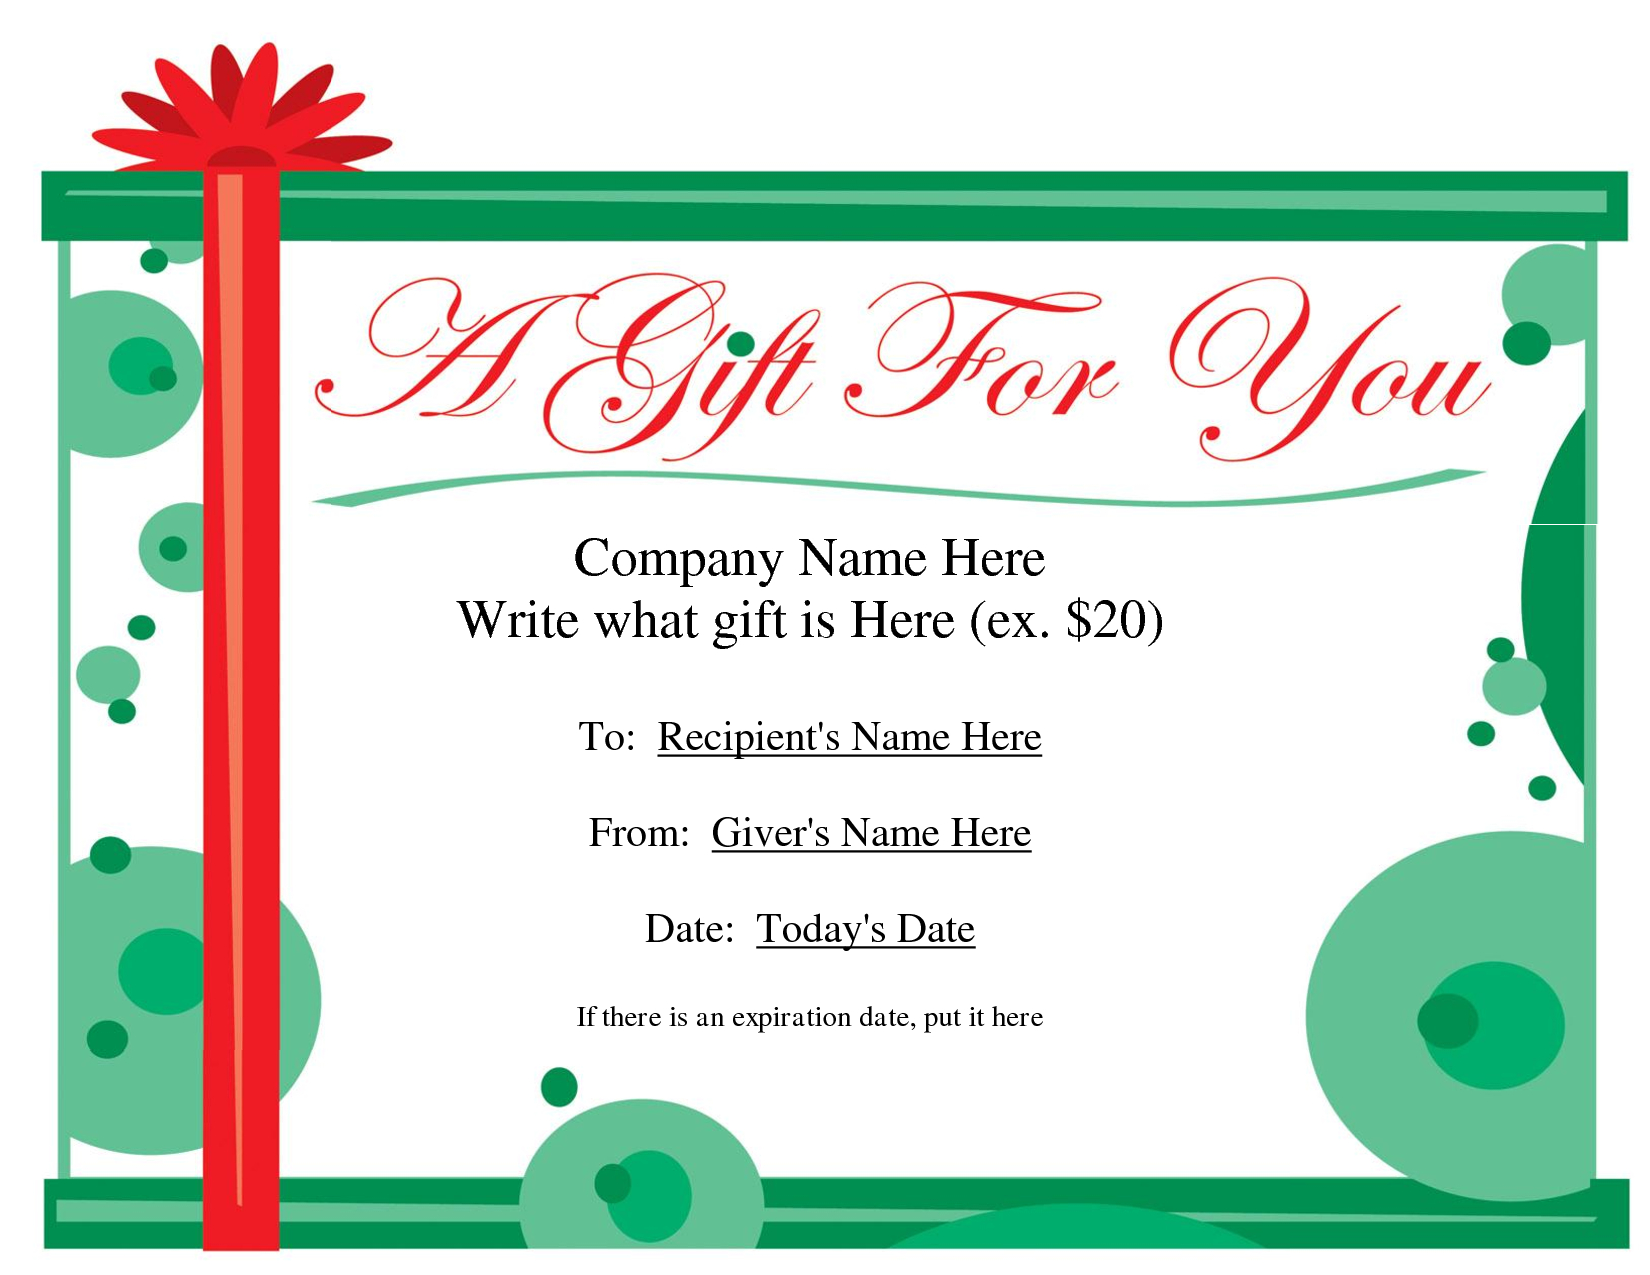 Free Printable Gift Certificate Template | Free Christmas Gift inside Free Christmas Gift Certificate Templates